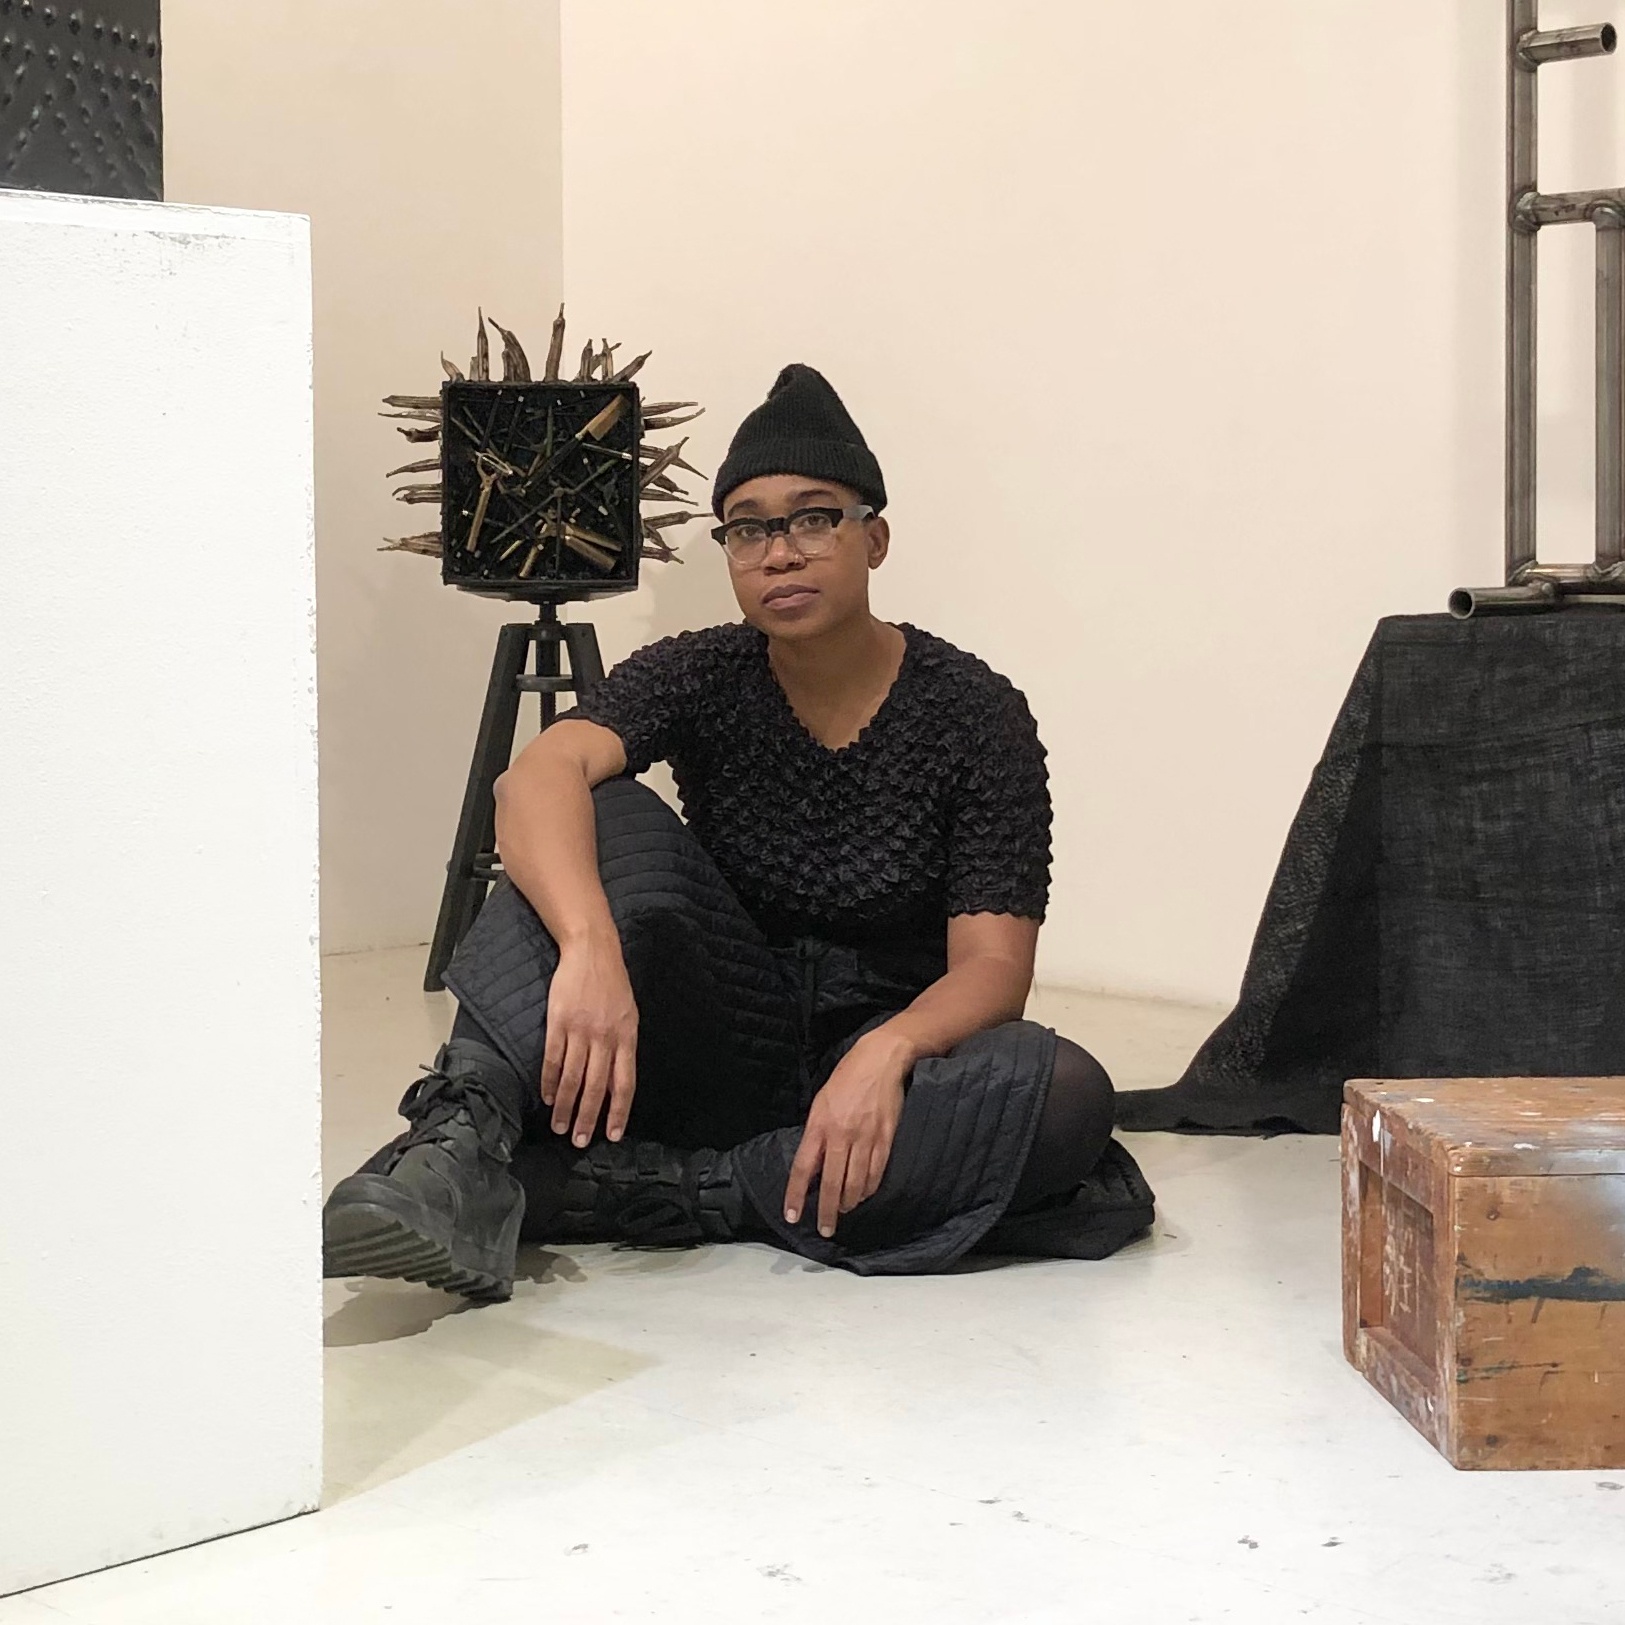 A Black artist sits casually on the floor of a white-walled gallery space, with one arm draped over her leg. She looks directly at us, dressed in all black wearing cap, glasses, t-shirt, pants, and boots. Around her and sculptures sitting on the ground and on a pedestal. One sculpture behind her shoulder includes spiky protrusions from a square surface. 